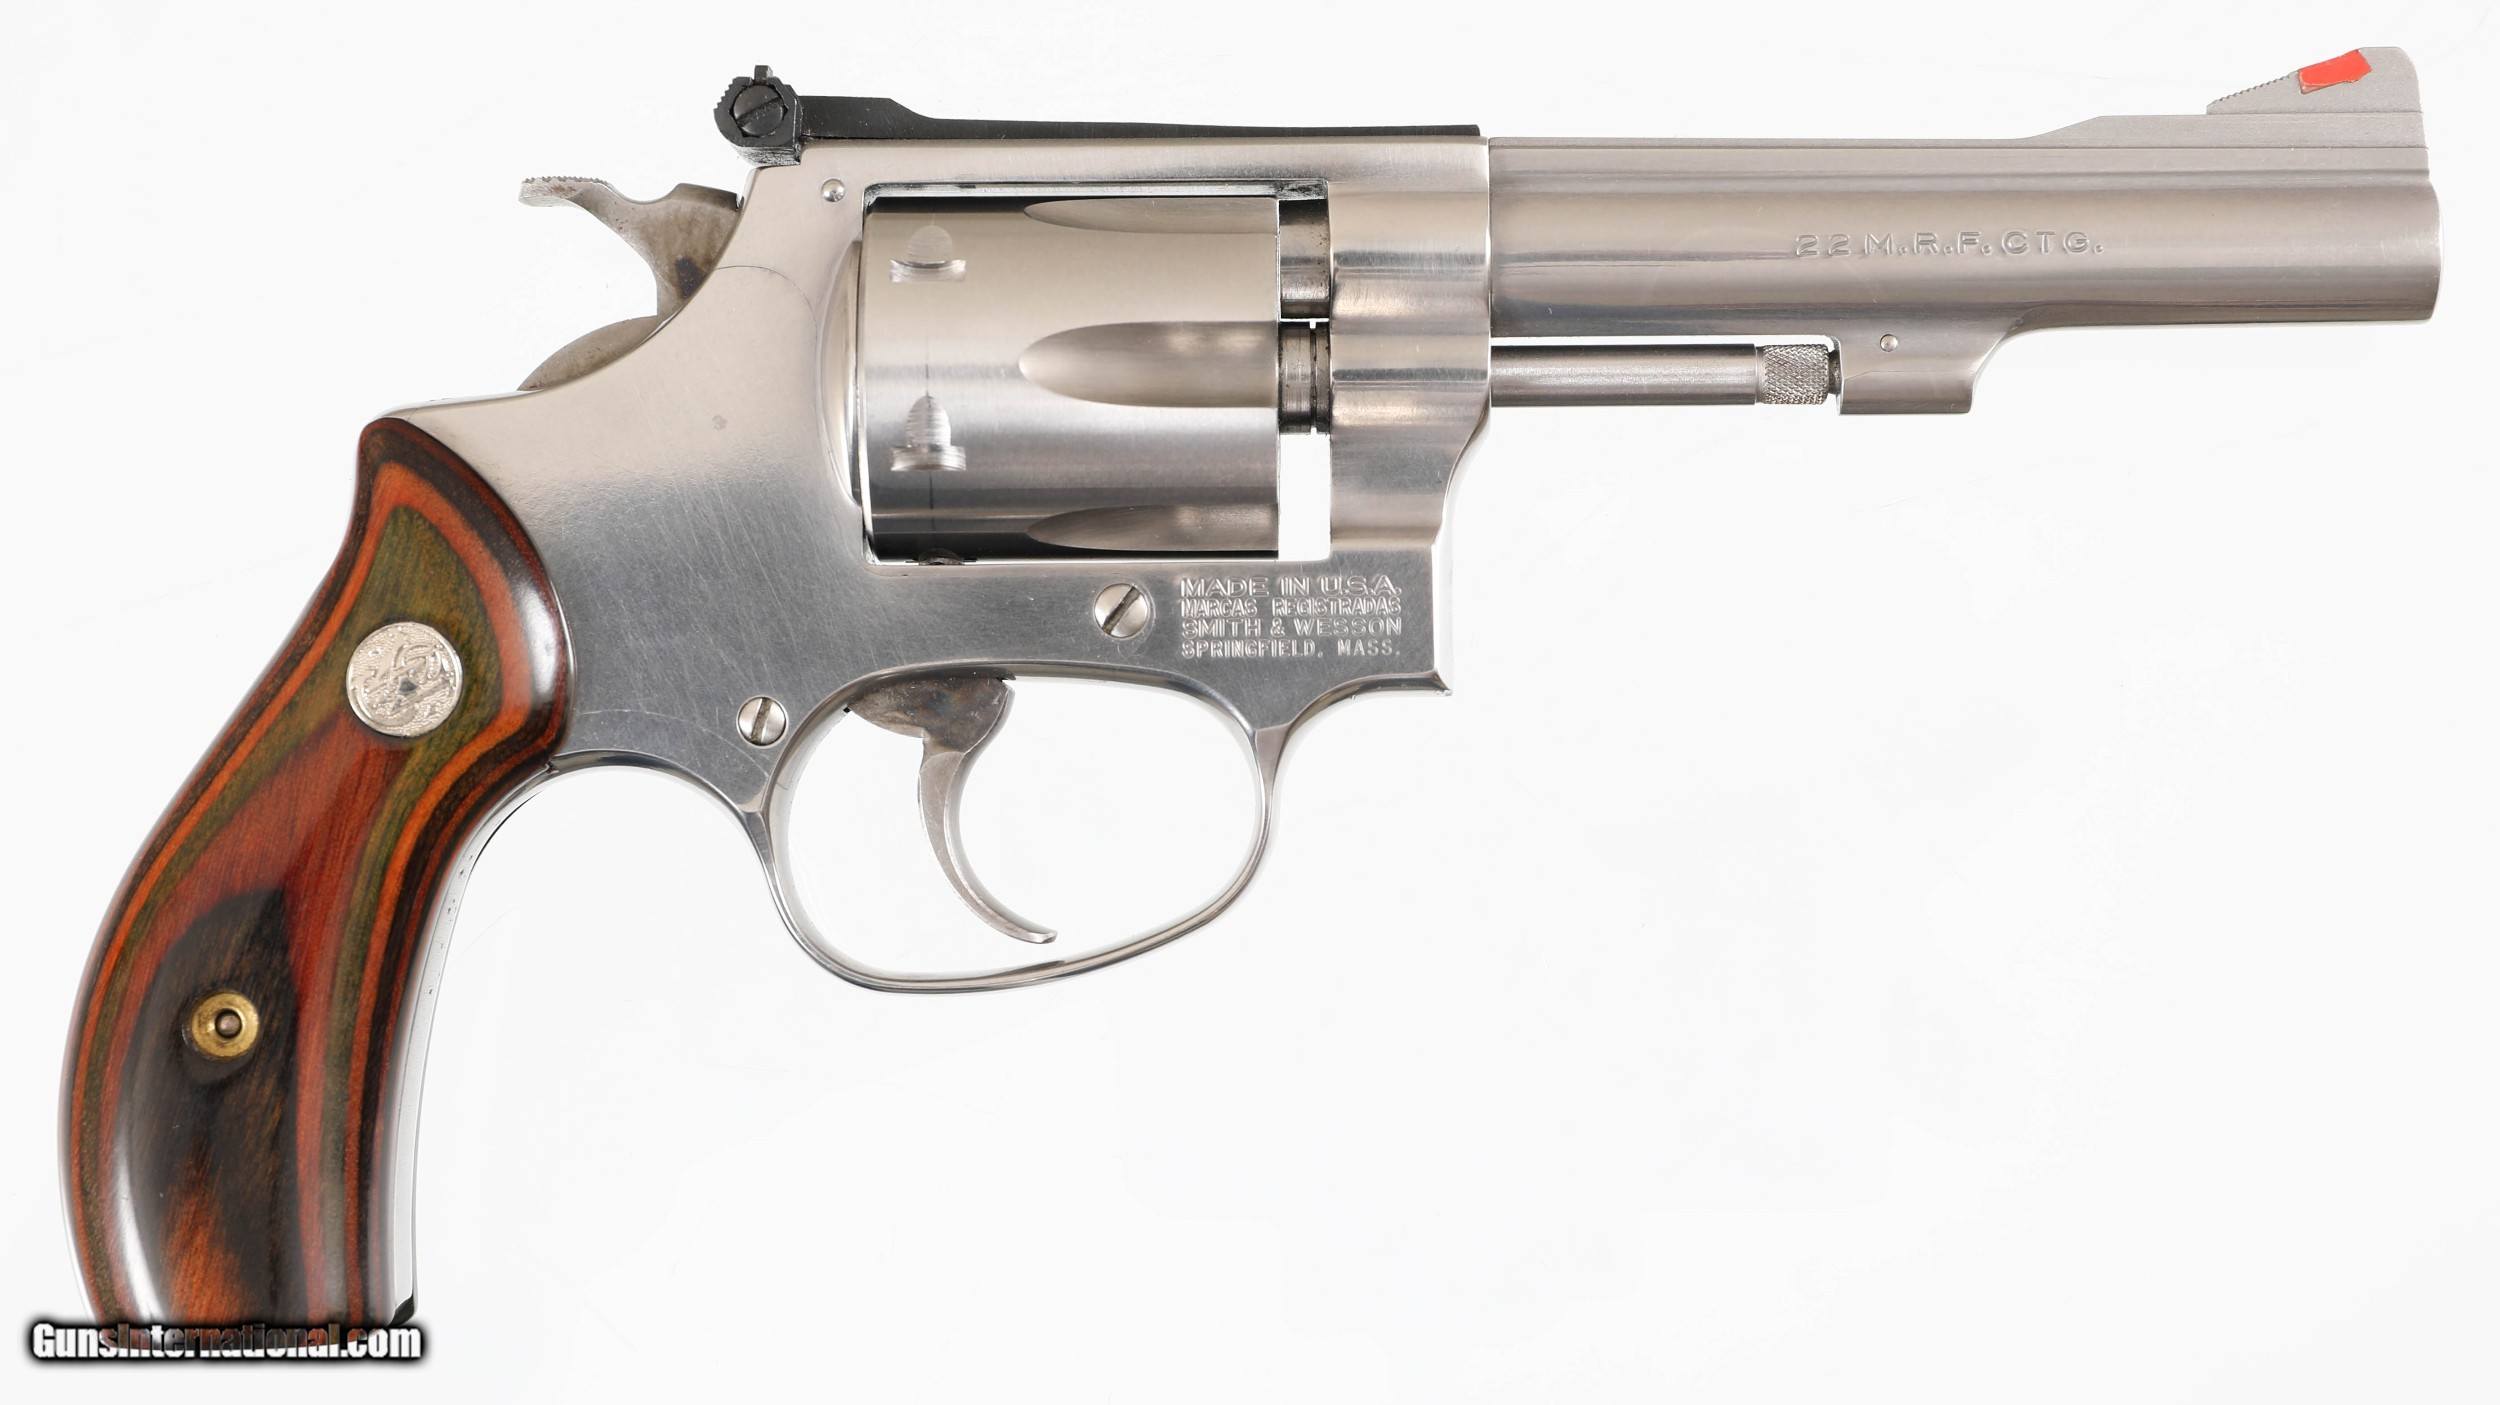 Smith and wesson 22 revolver serial number lookup - paseeo